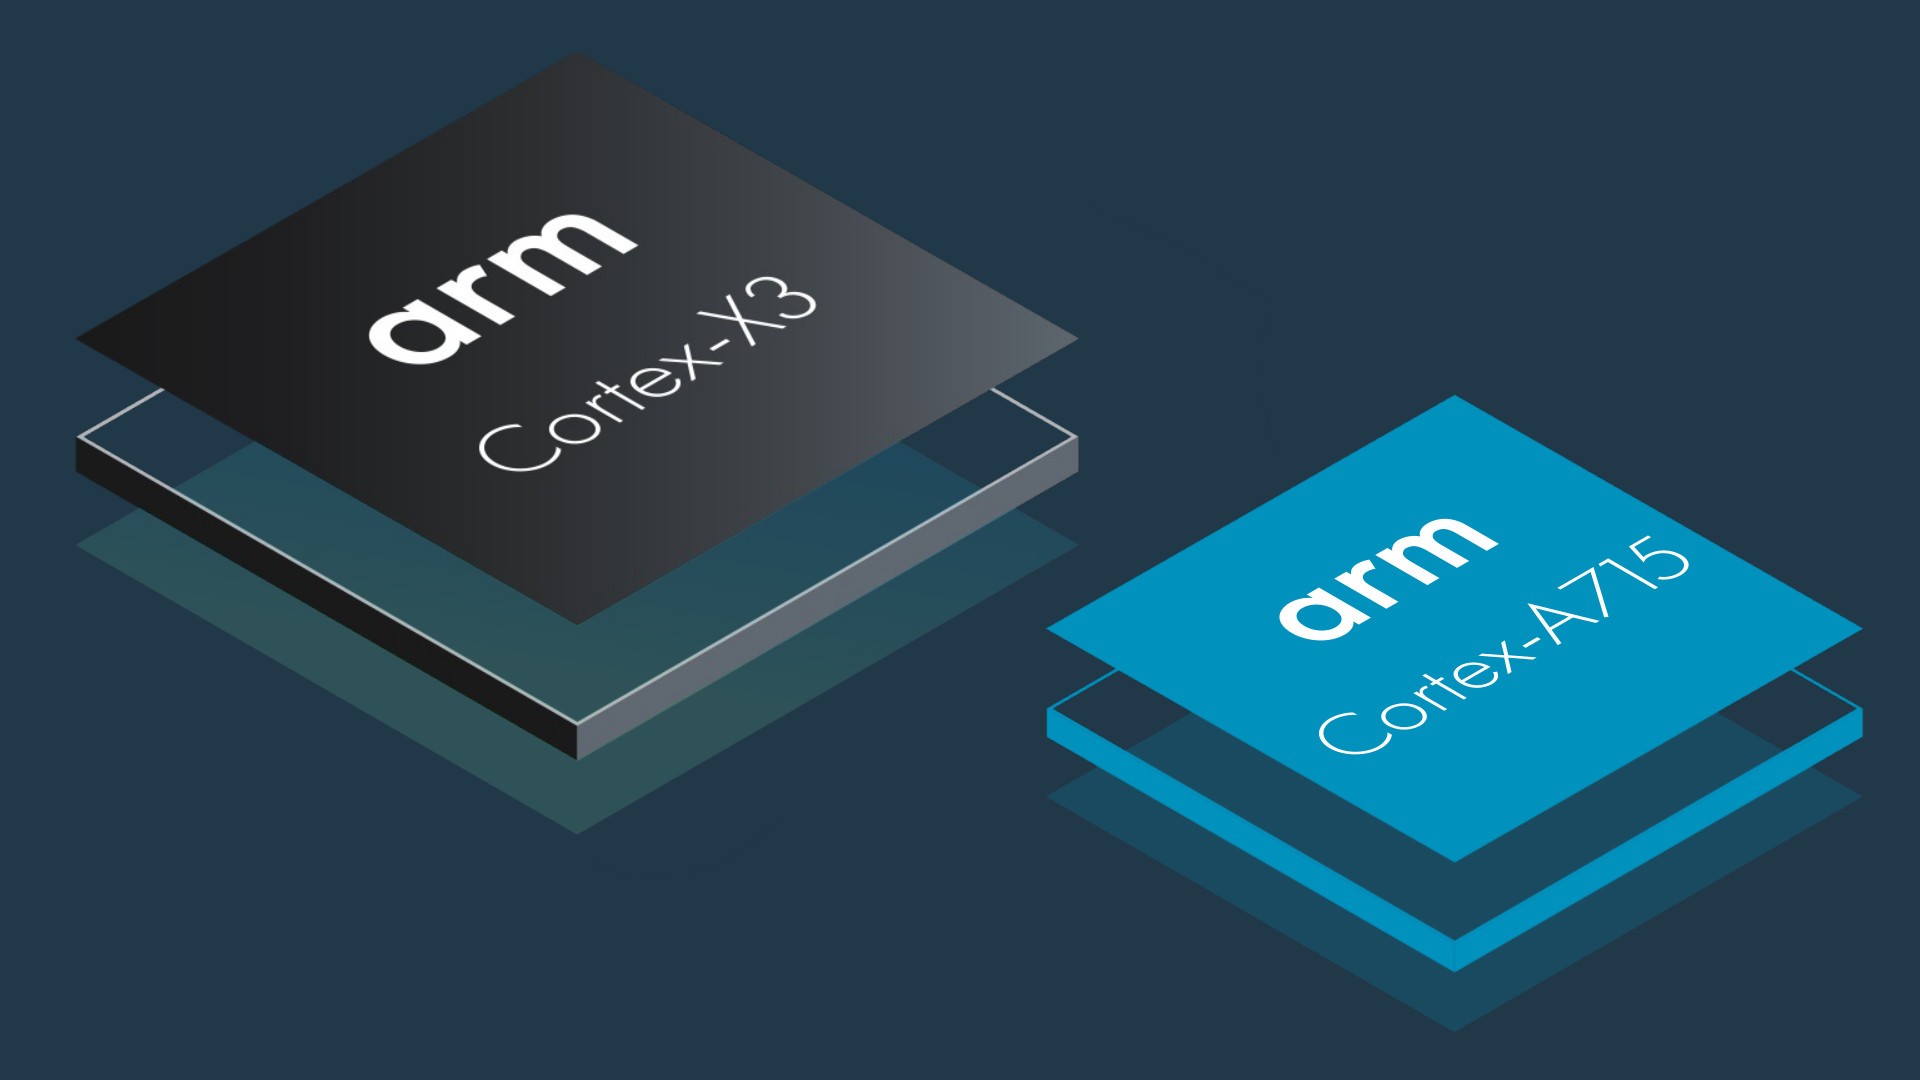 Arm Cortex-X3 CPU & Immortalis GPU announced: What does it mean for future Android smartphones?